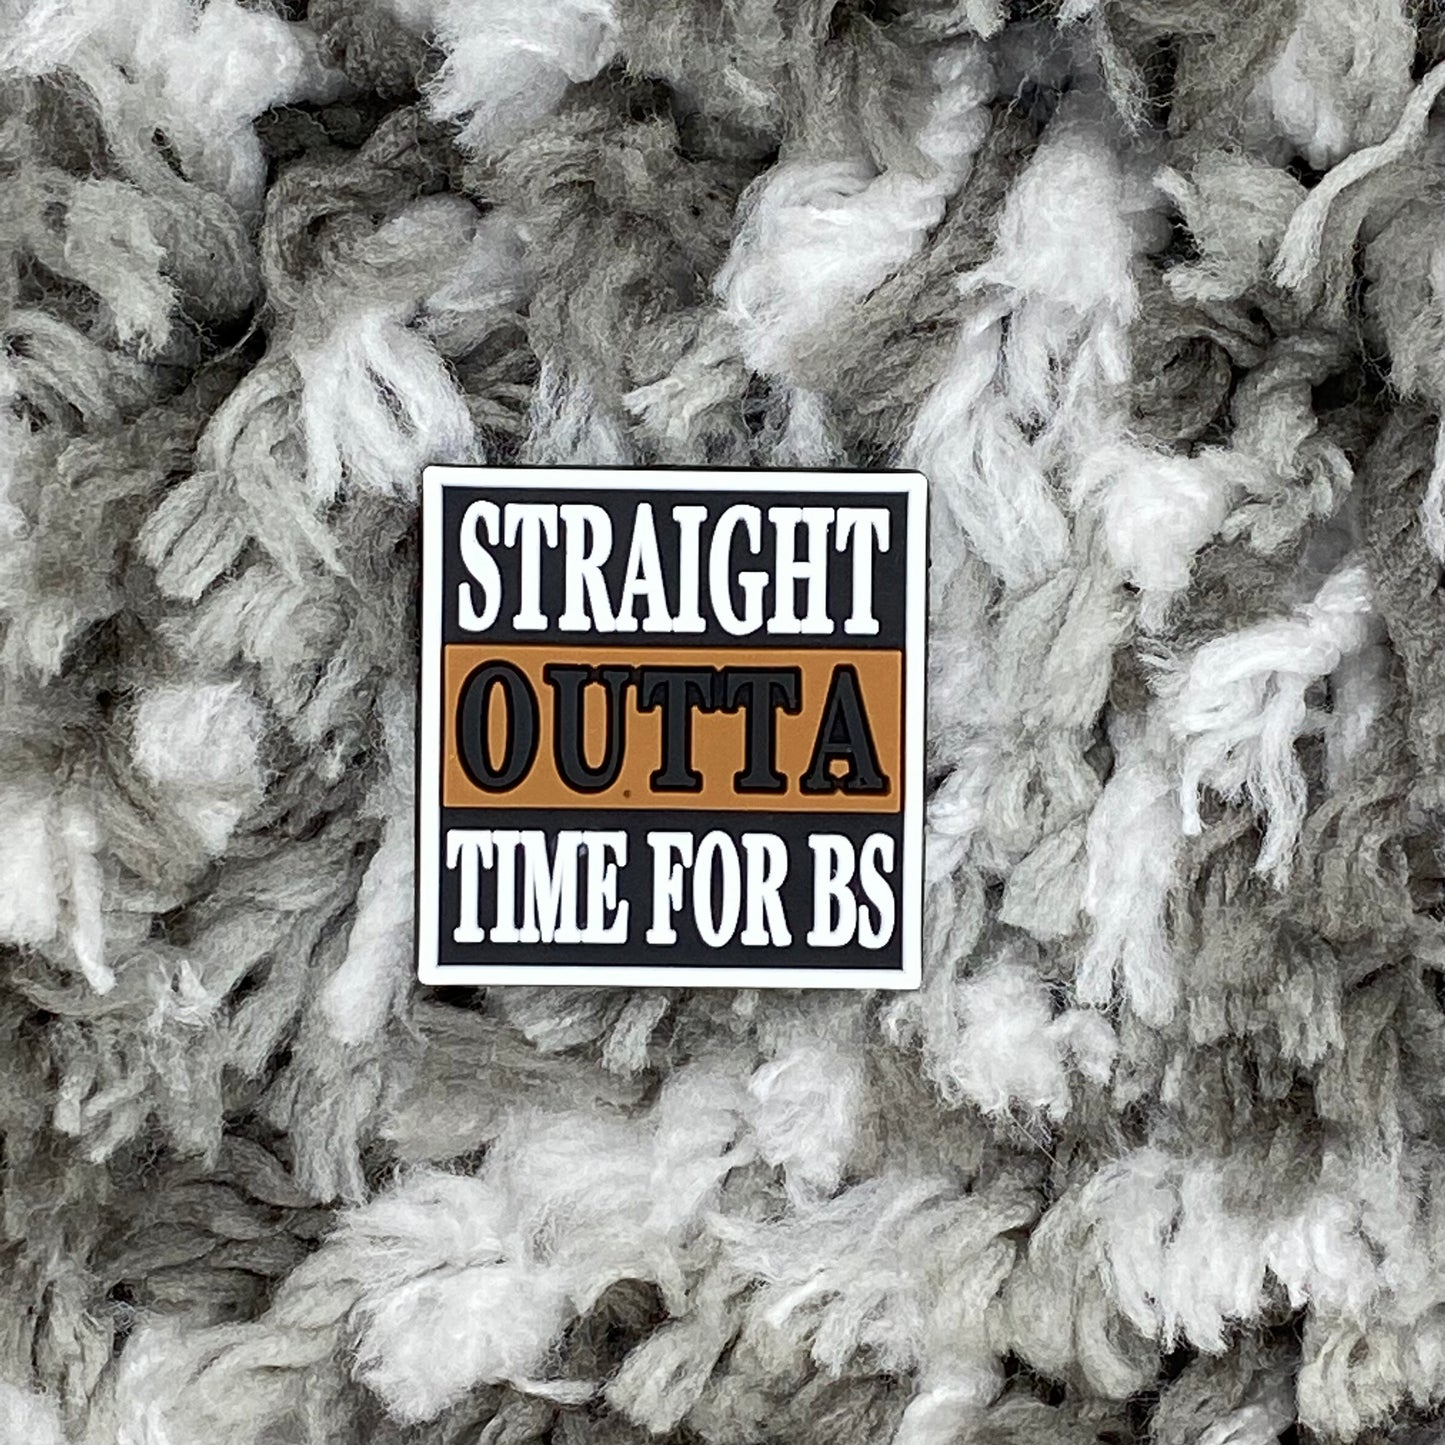 Straight outta time for bs